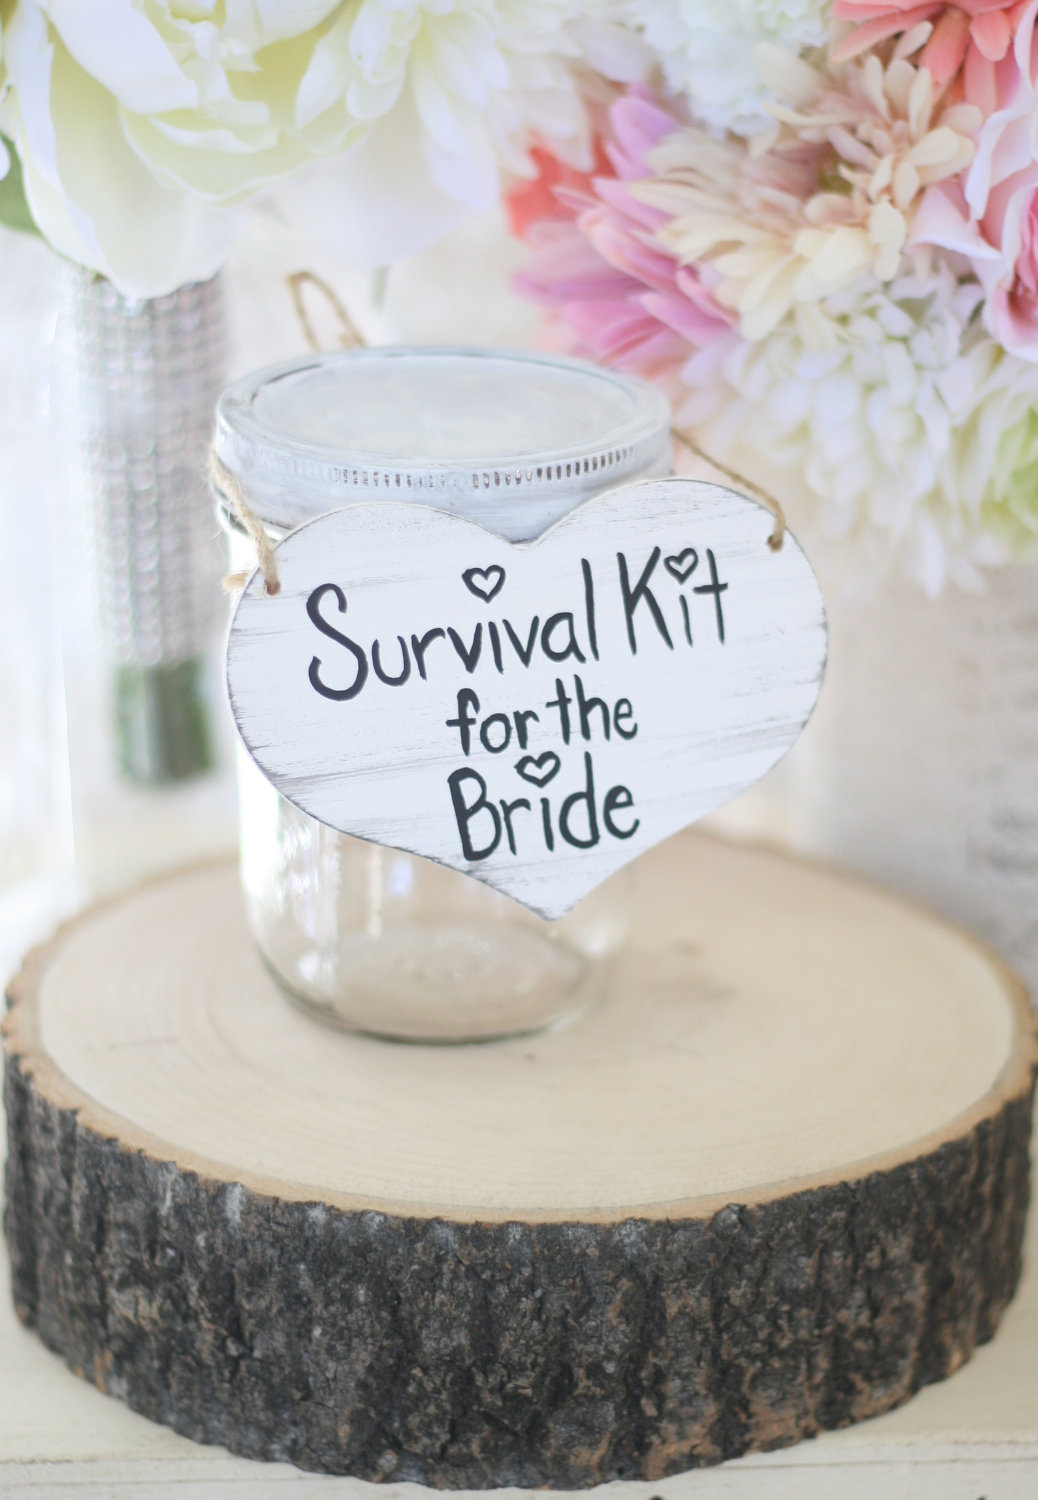 10 Perfect Unique Bridal Shower Gift Ideas For Bride unique design bridal shower gift ideas white salmon wines 1 2024